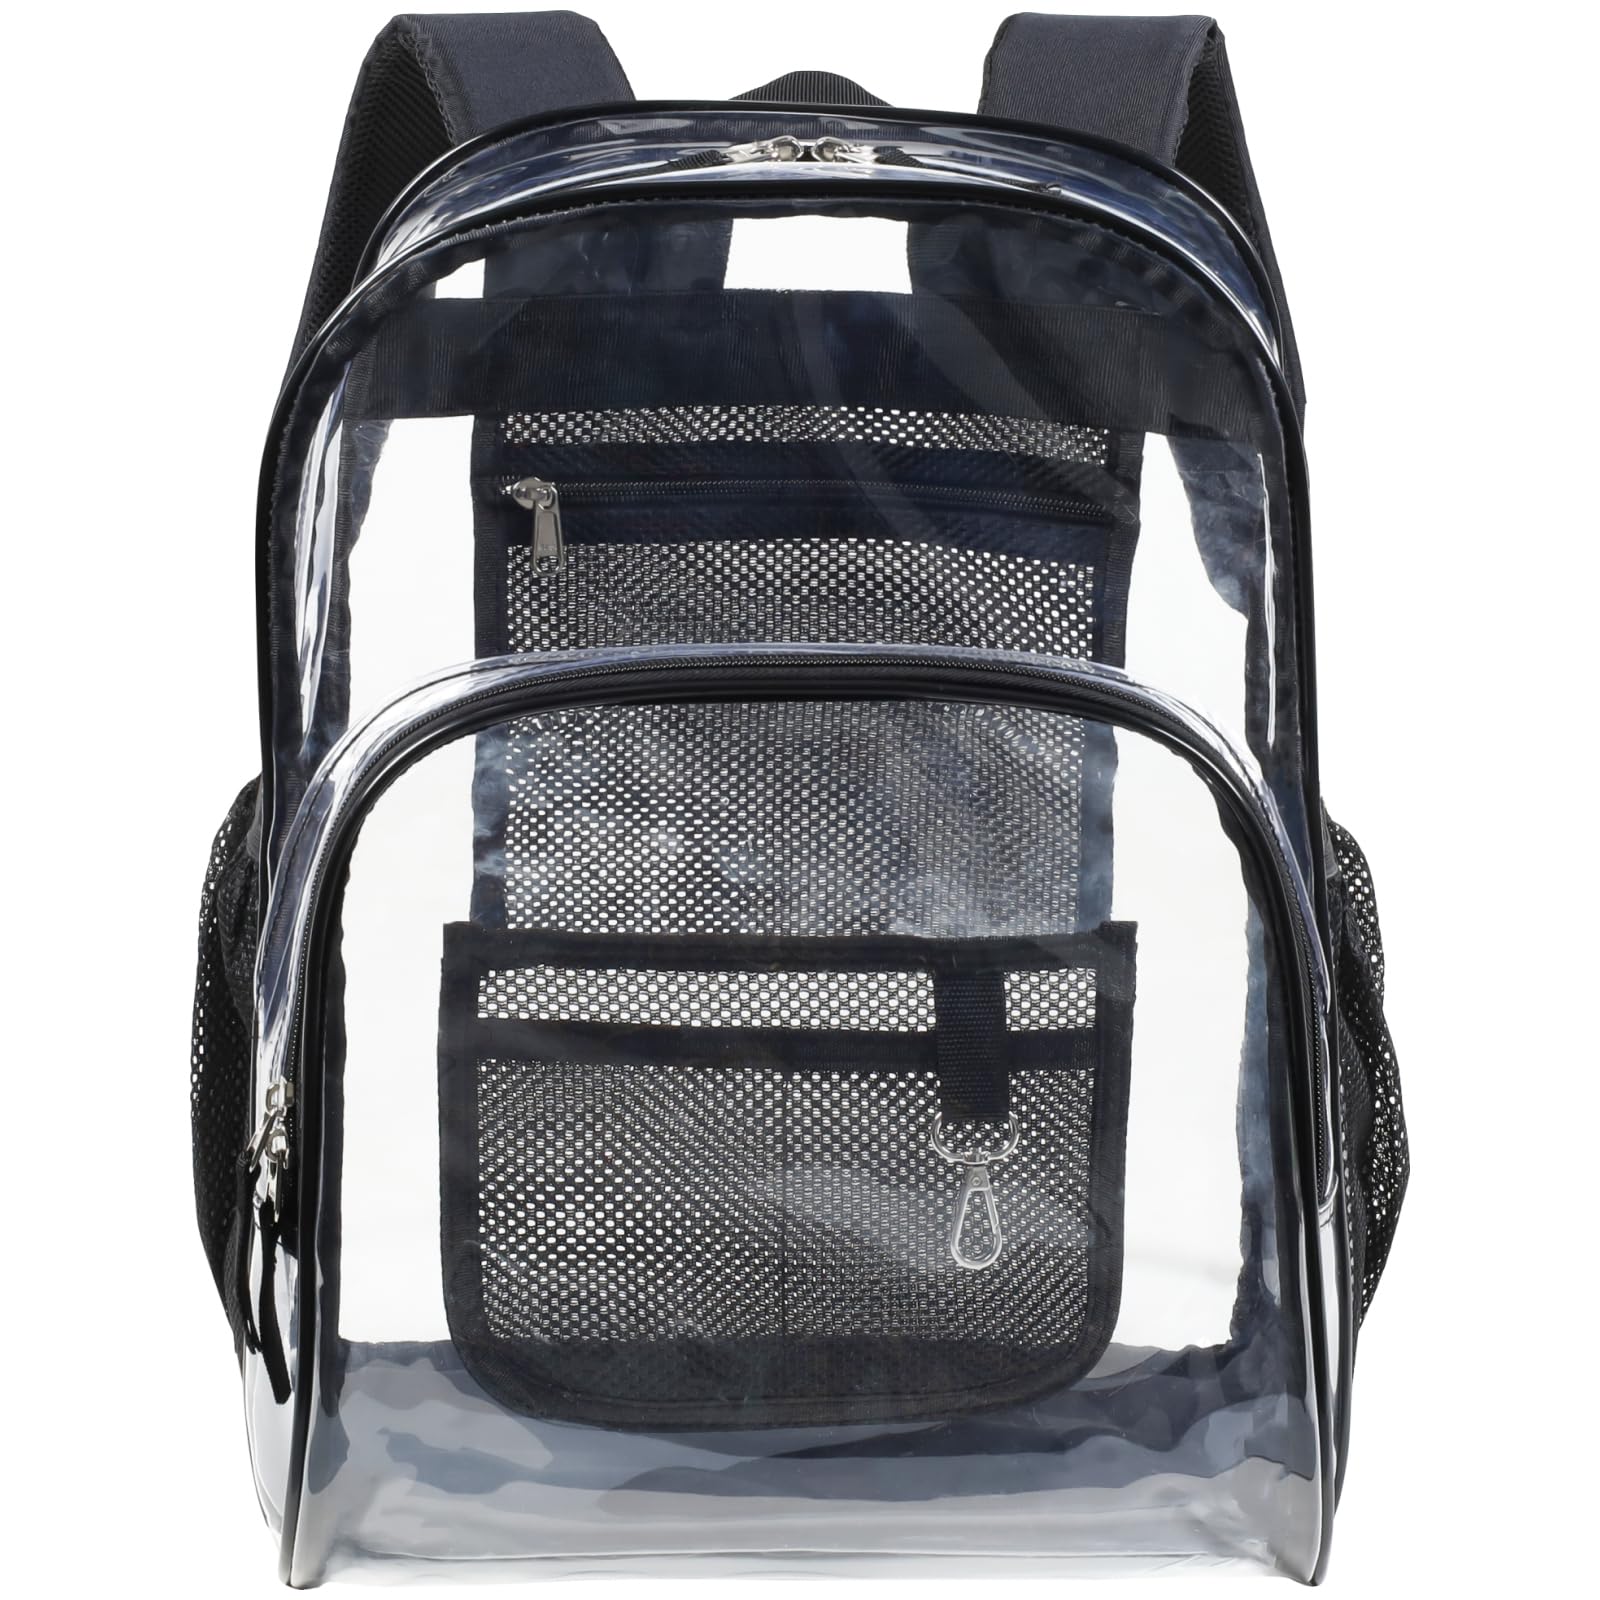 Clear college backpack